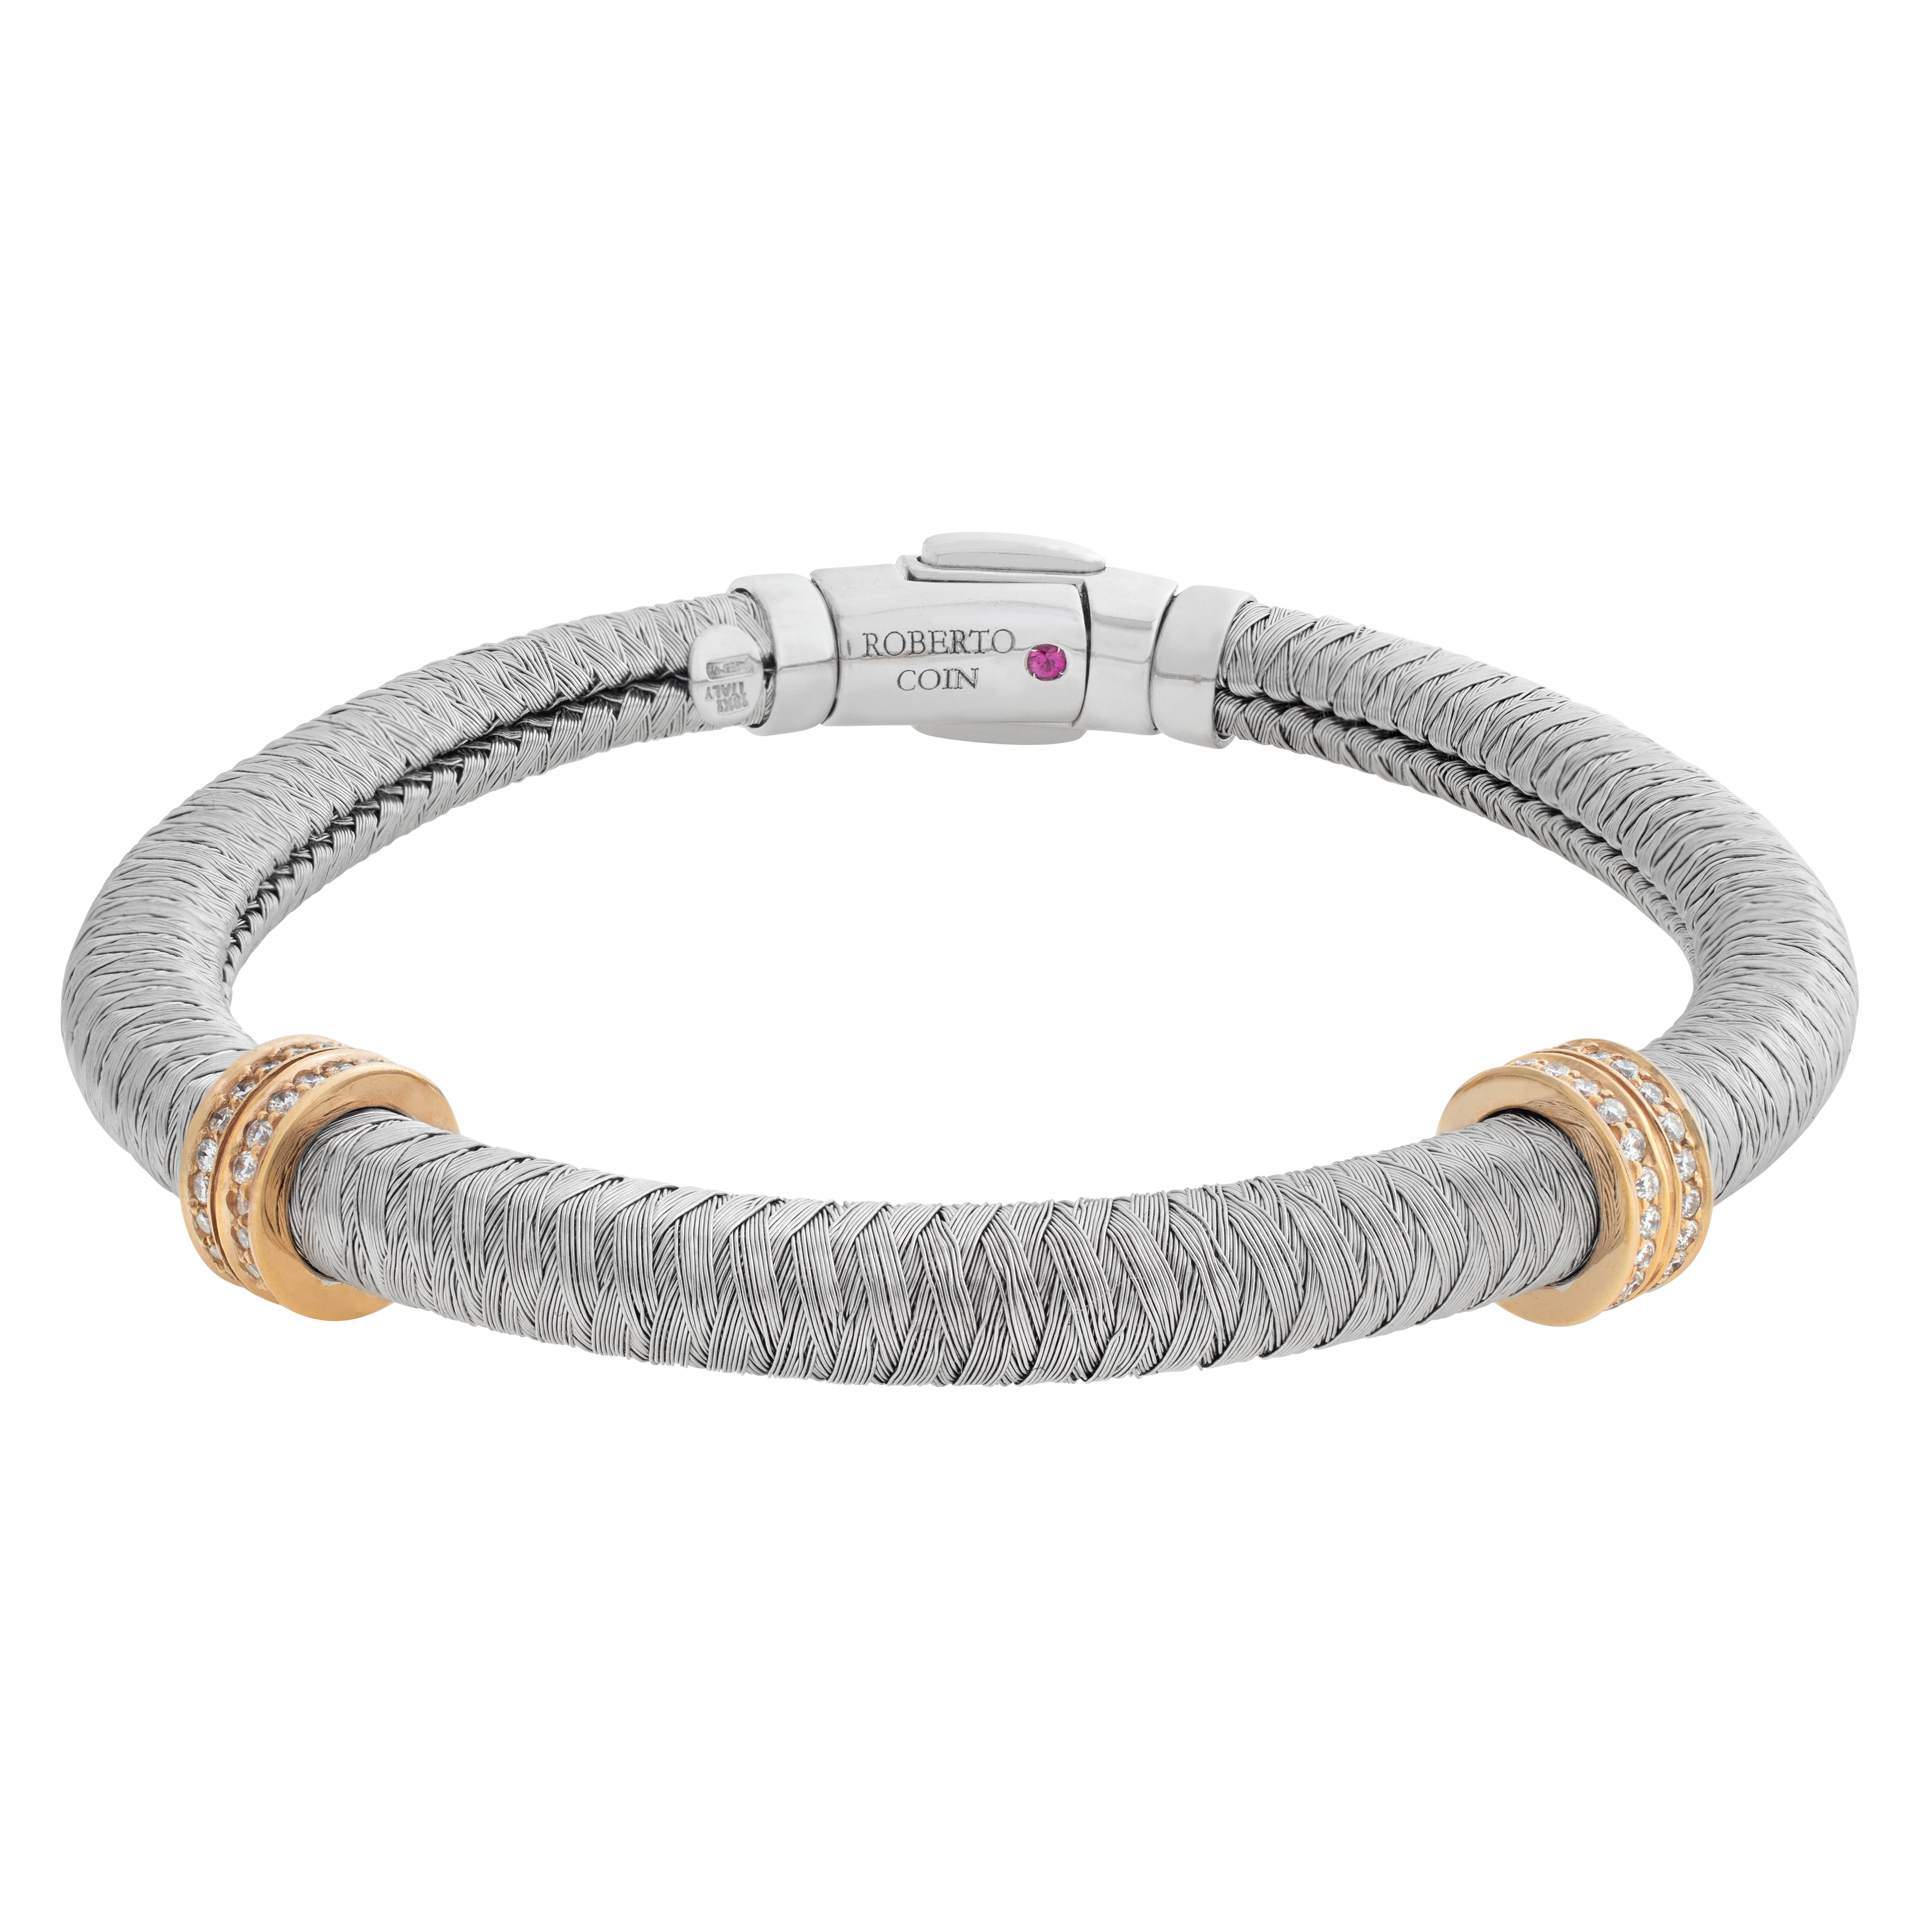 Roberto Coin Primavera Collection, Flexible Weaved Coil Bracelet In 18k White Gold, With 2 Rose Gold Diamond Stations. image 1